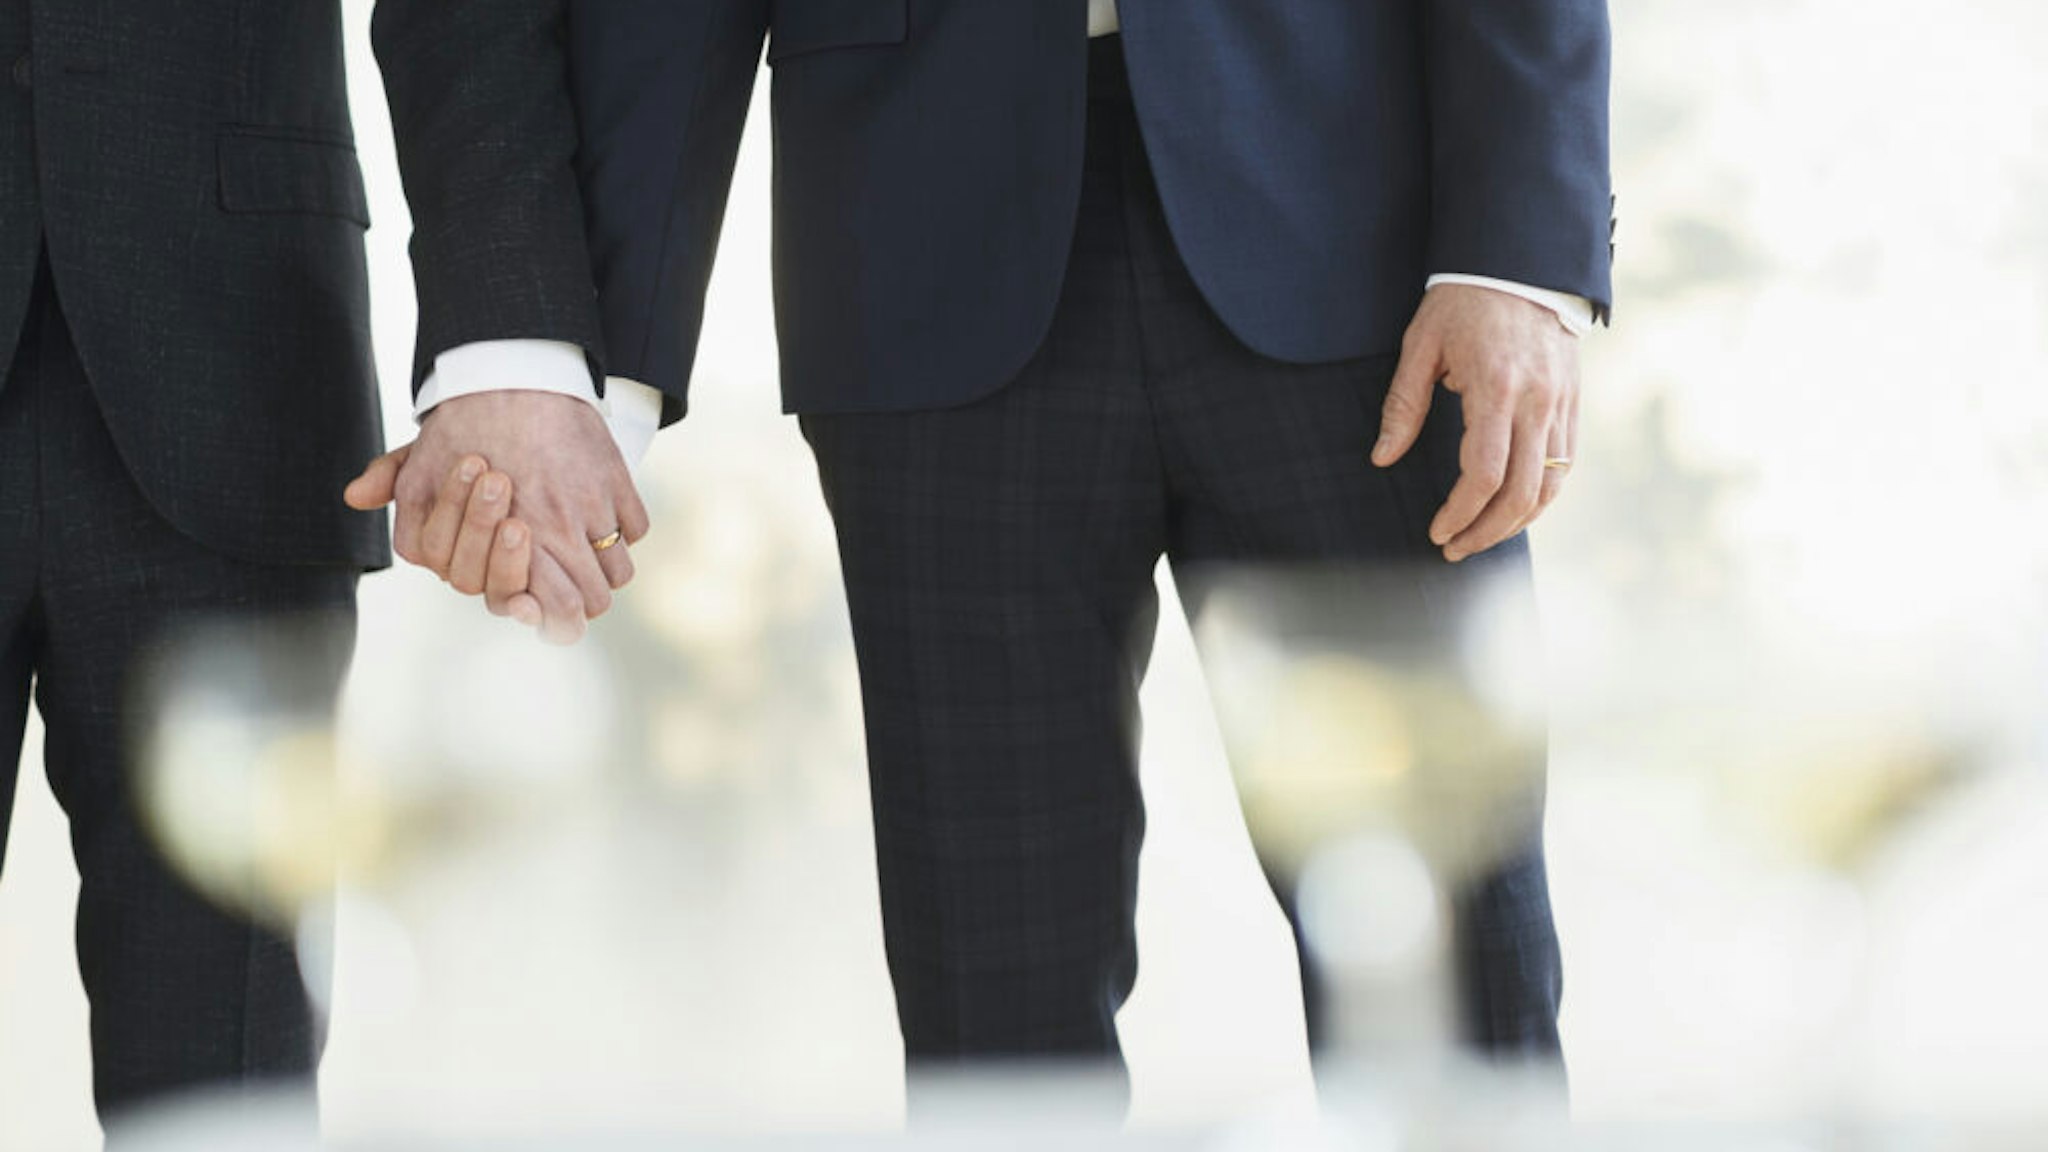 Caucasian gay grooms holding hands at wedding - stock photo